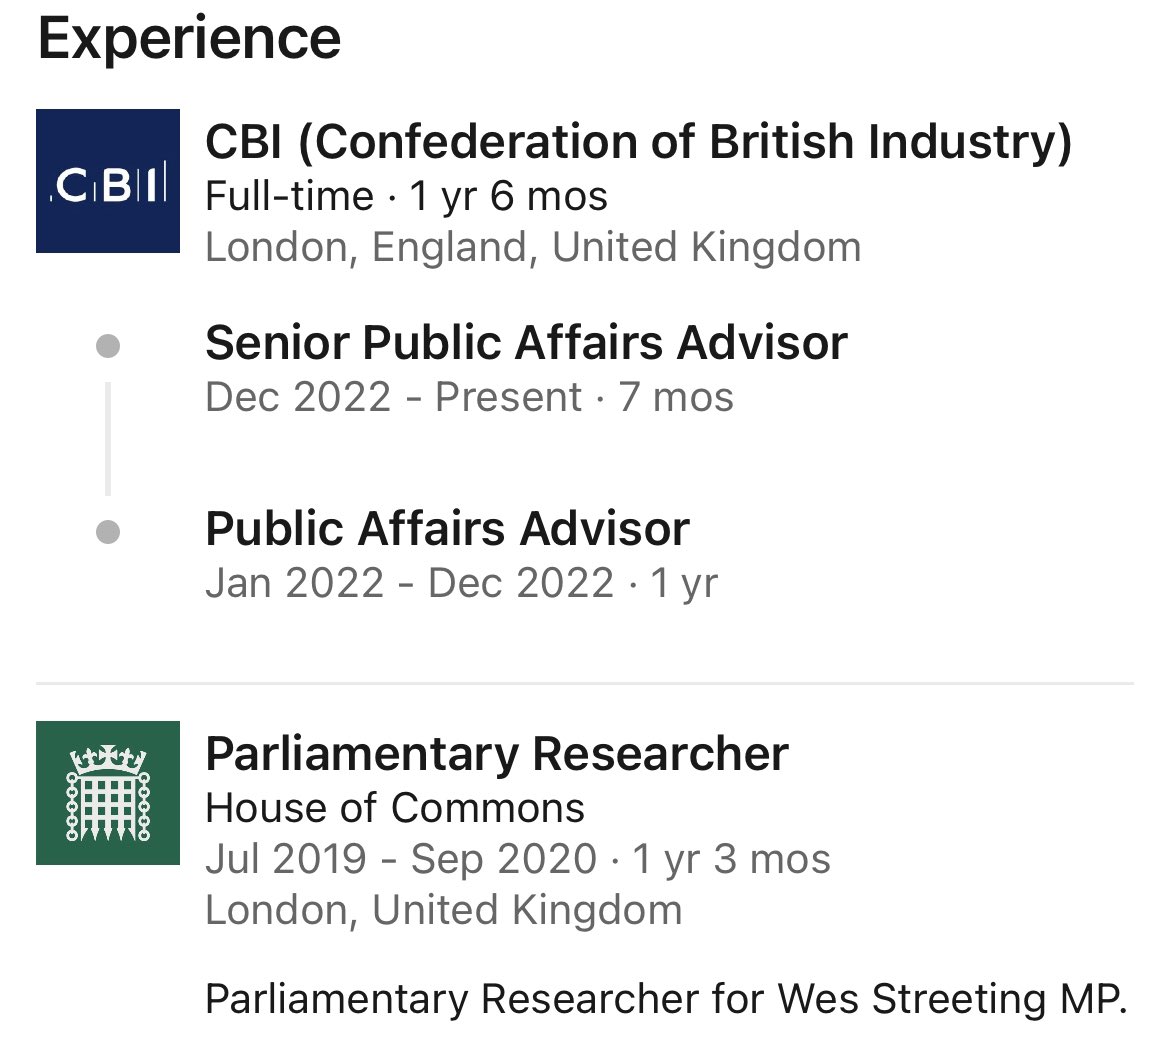 Labour’s candidate in Selby and Ainsty finished their degree in 2019, finished their masters in 2021 and have worked in two places: parliament (for Wes Streeting) and the disgraced CBI. Really?

In terms of blue collar, working class representation Labour is a catastrophe.